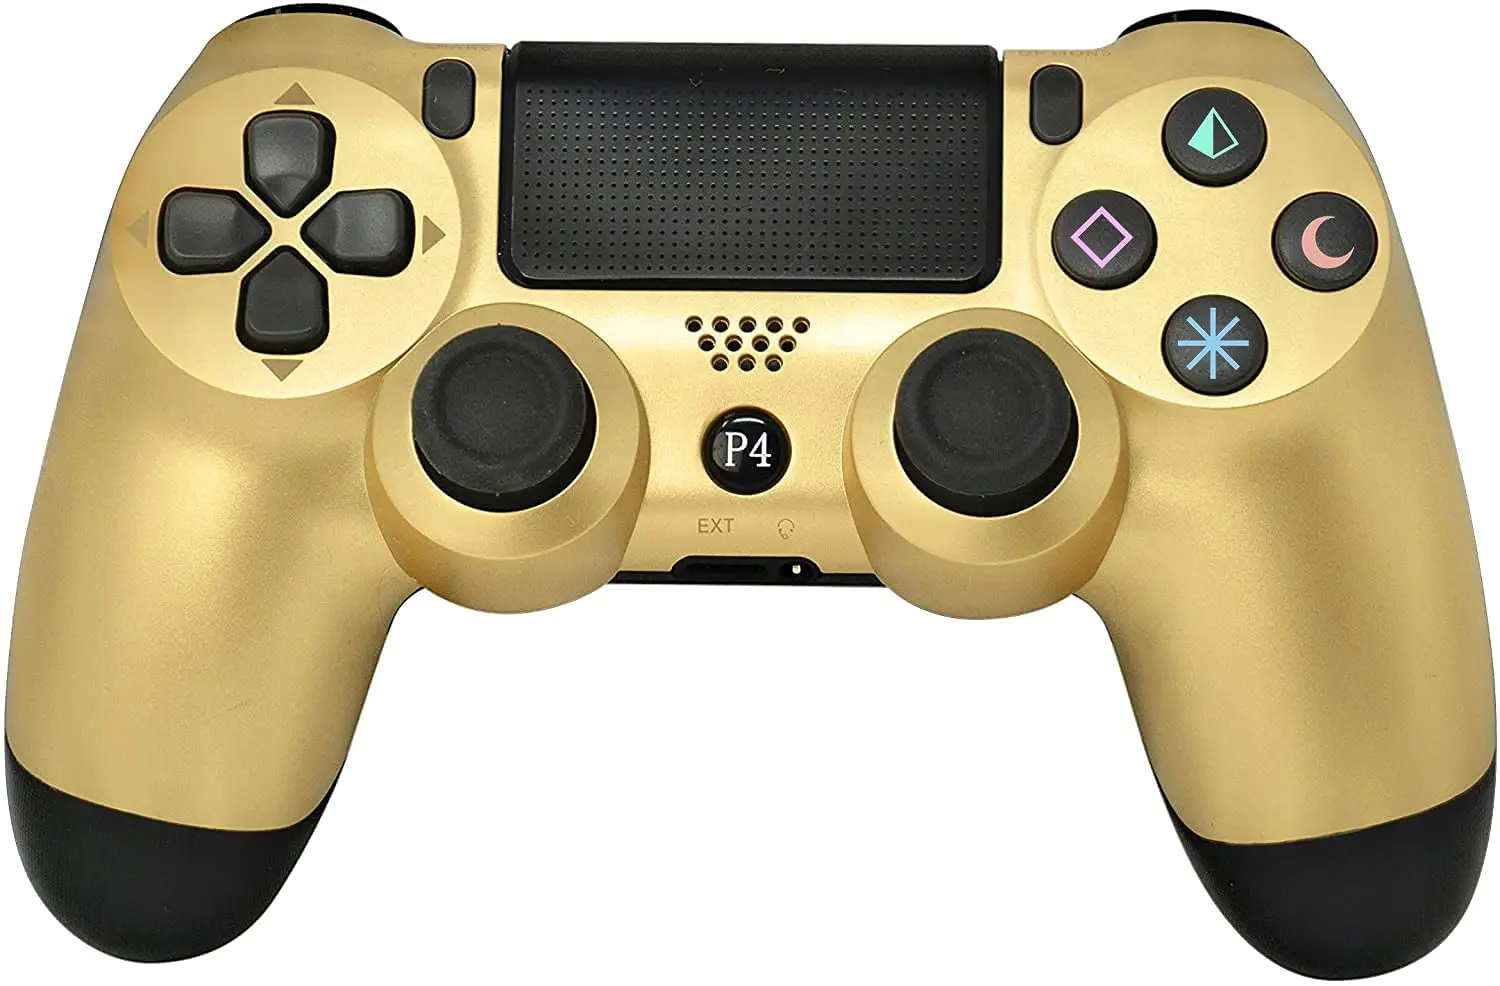 

Chasdi Ps4 Controller V2 Wireless Bluetooth with USB Cable for Sony Playstation 4 Compatible with Windows Pc & Android Os (Gold)